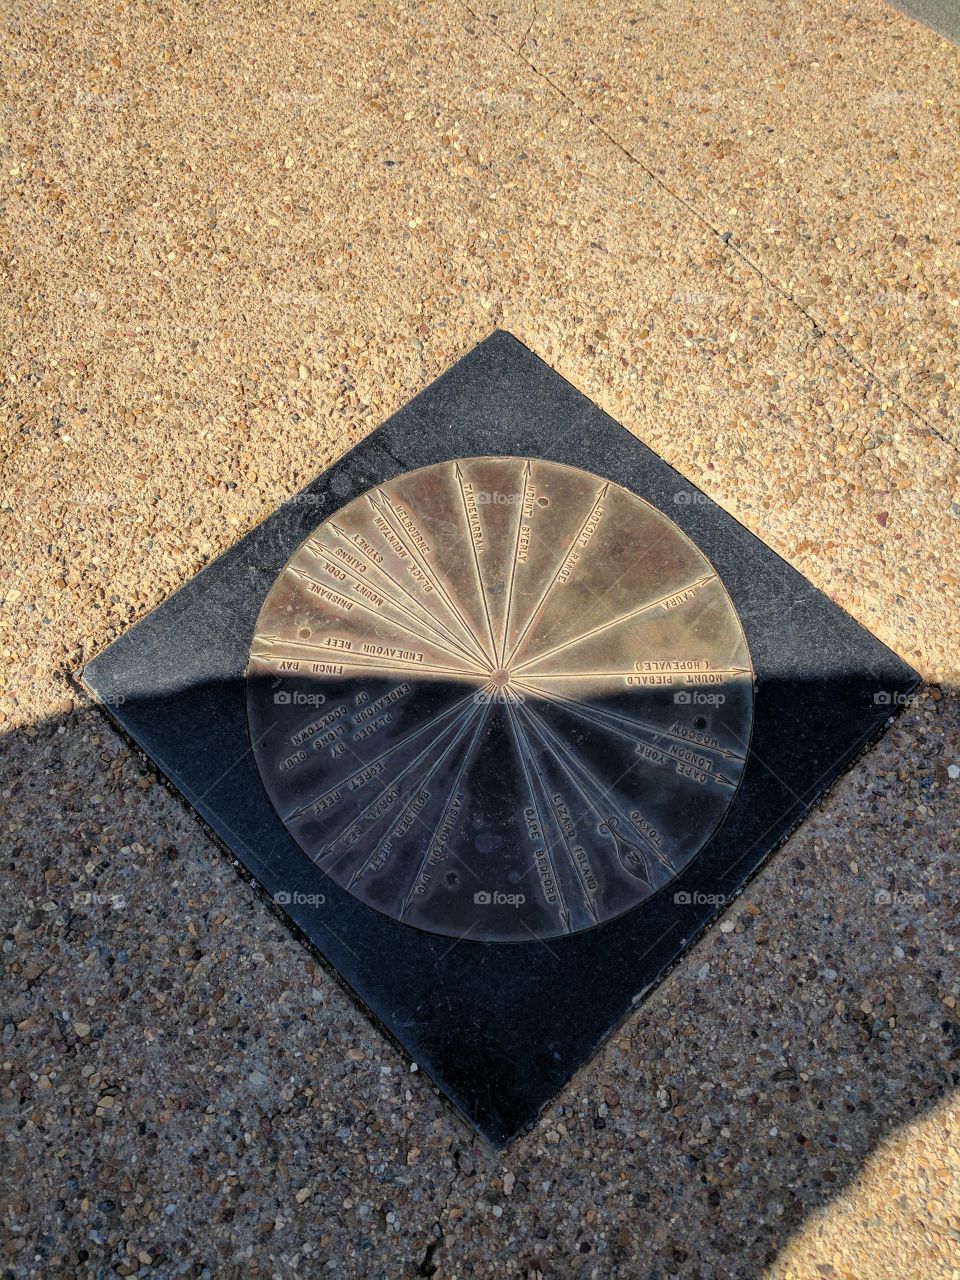 Sun dial showing what direction places in Australia are from this spot